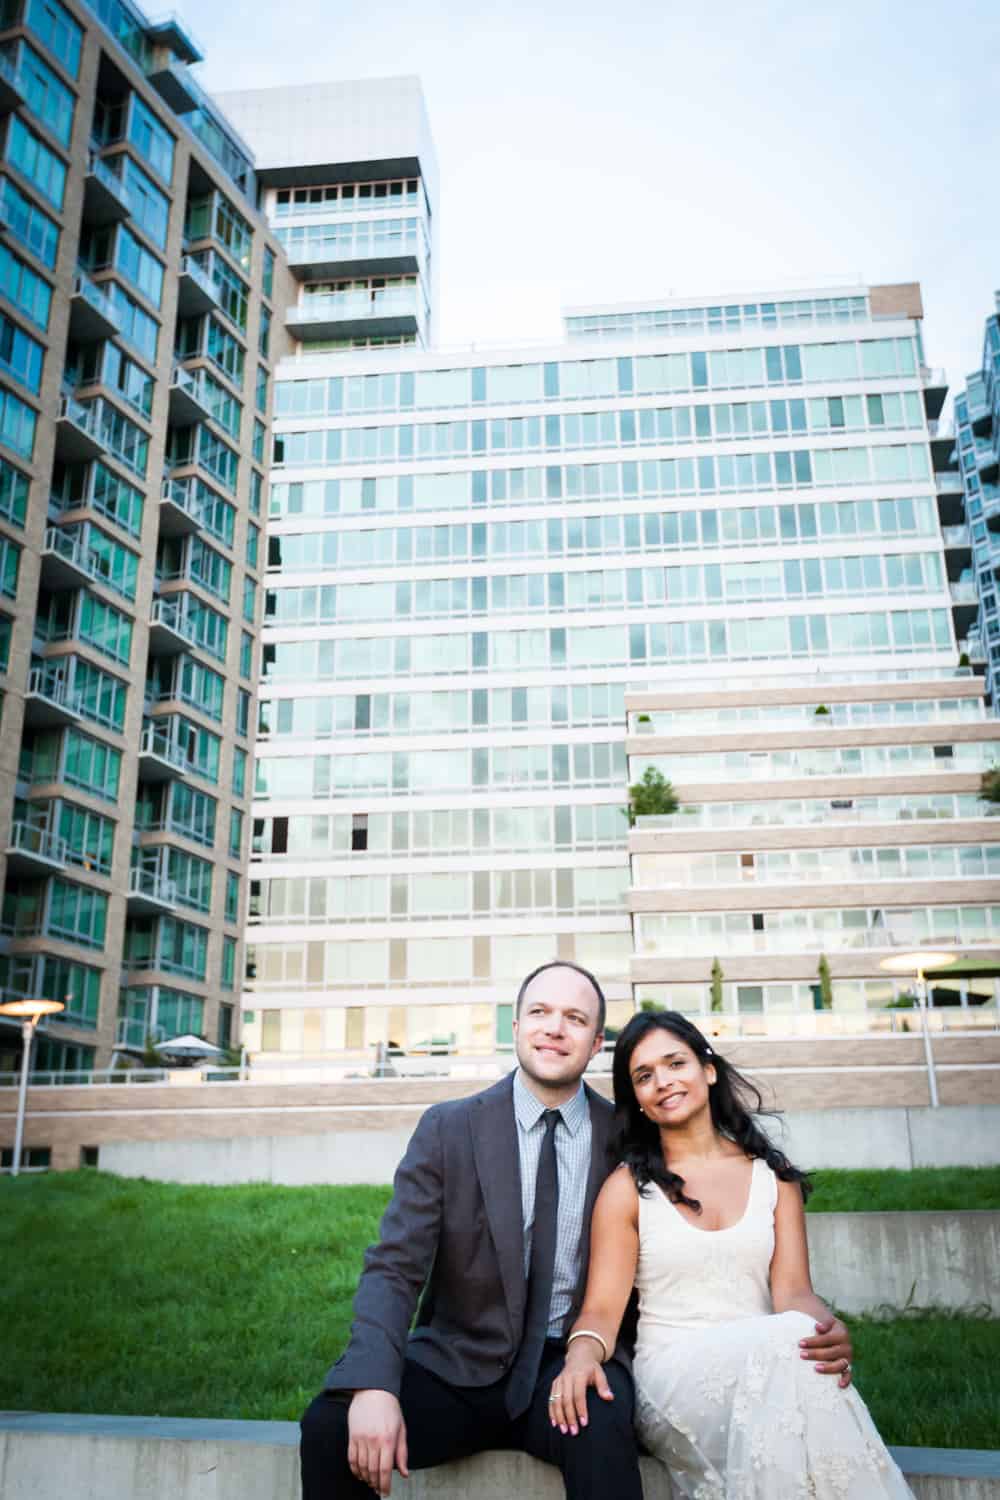 Couple in front of glass-front buildings in Long Island City